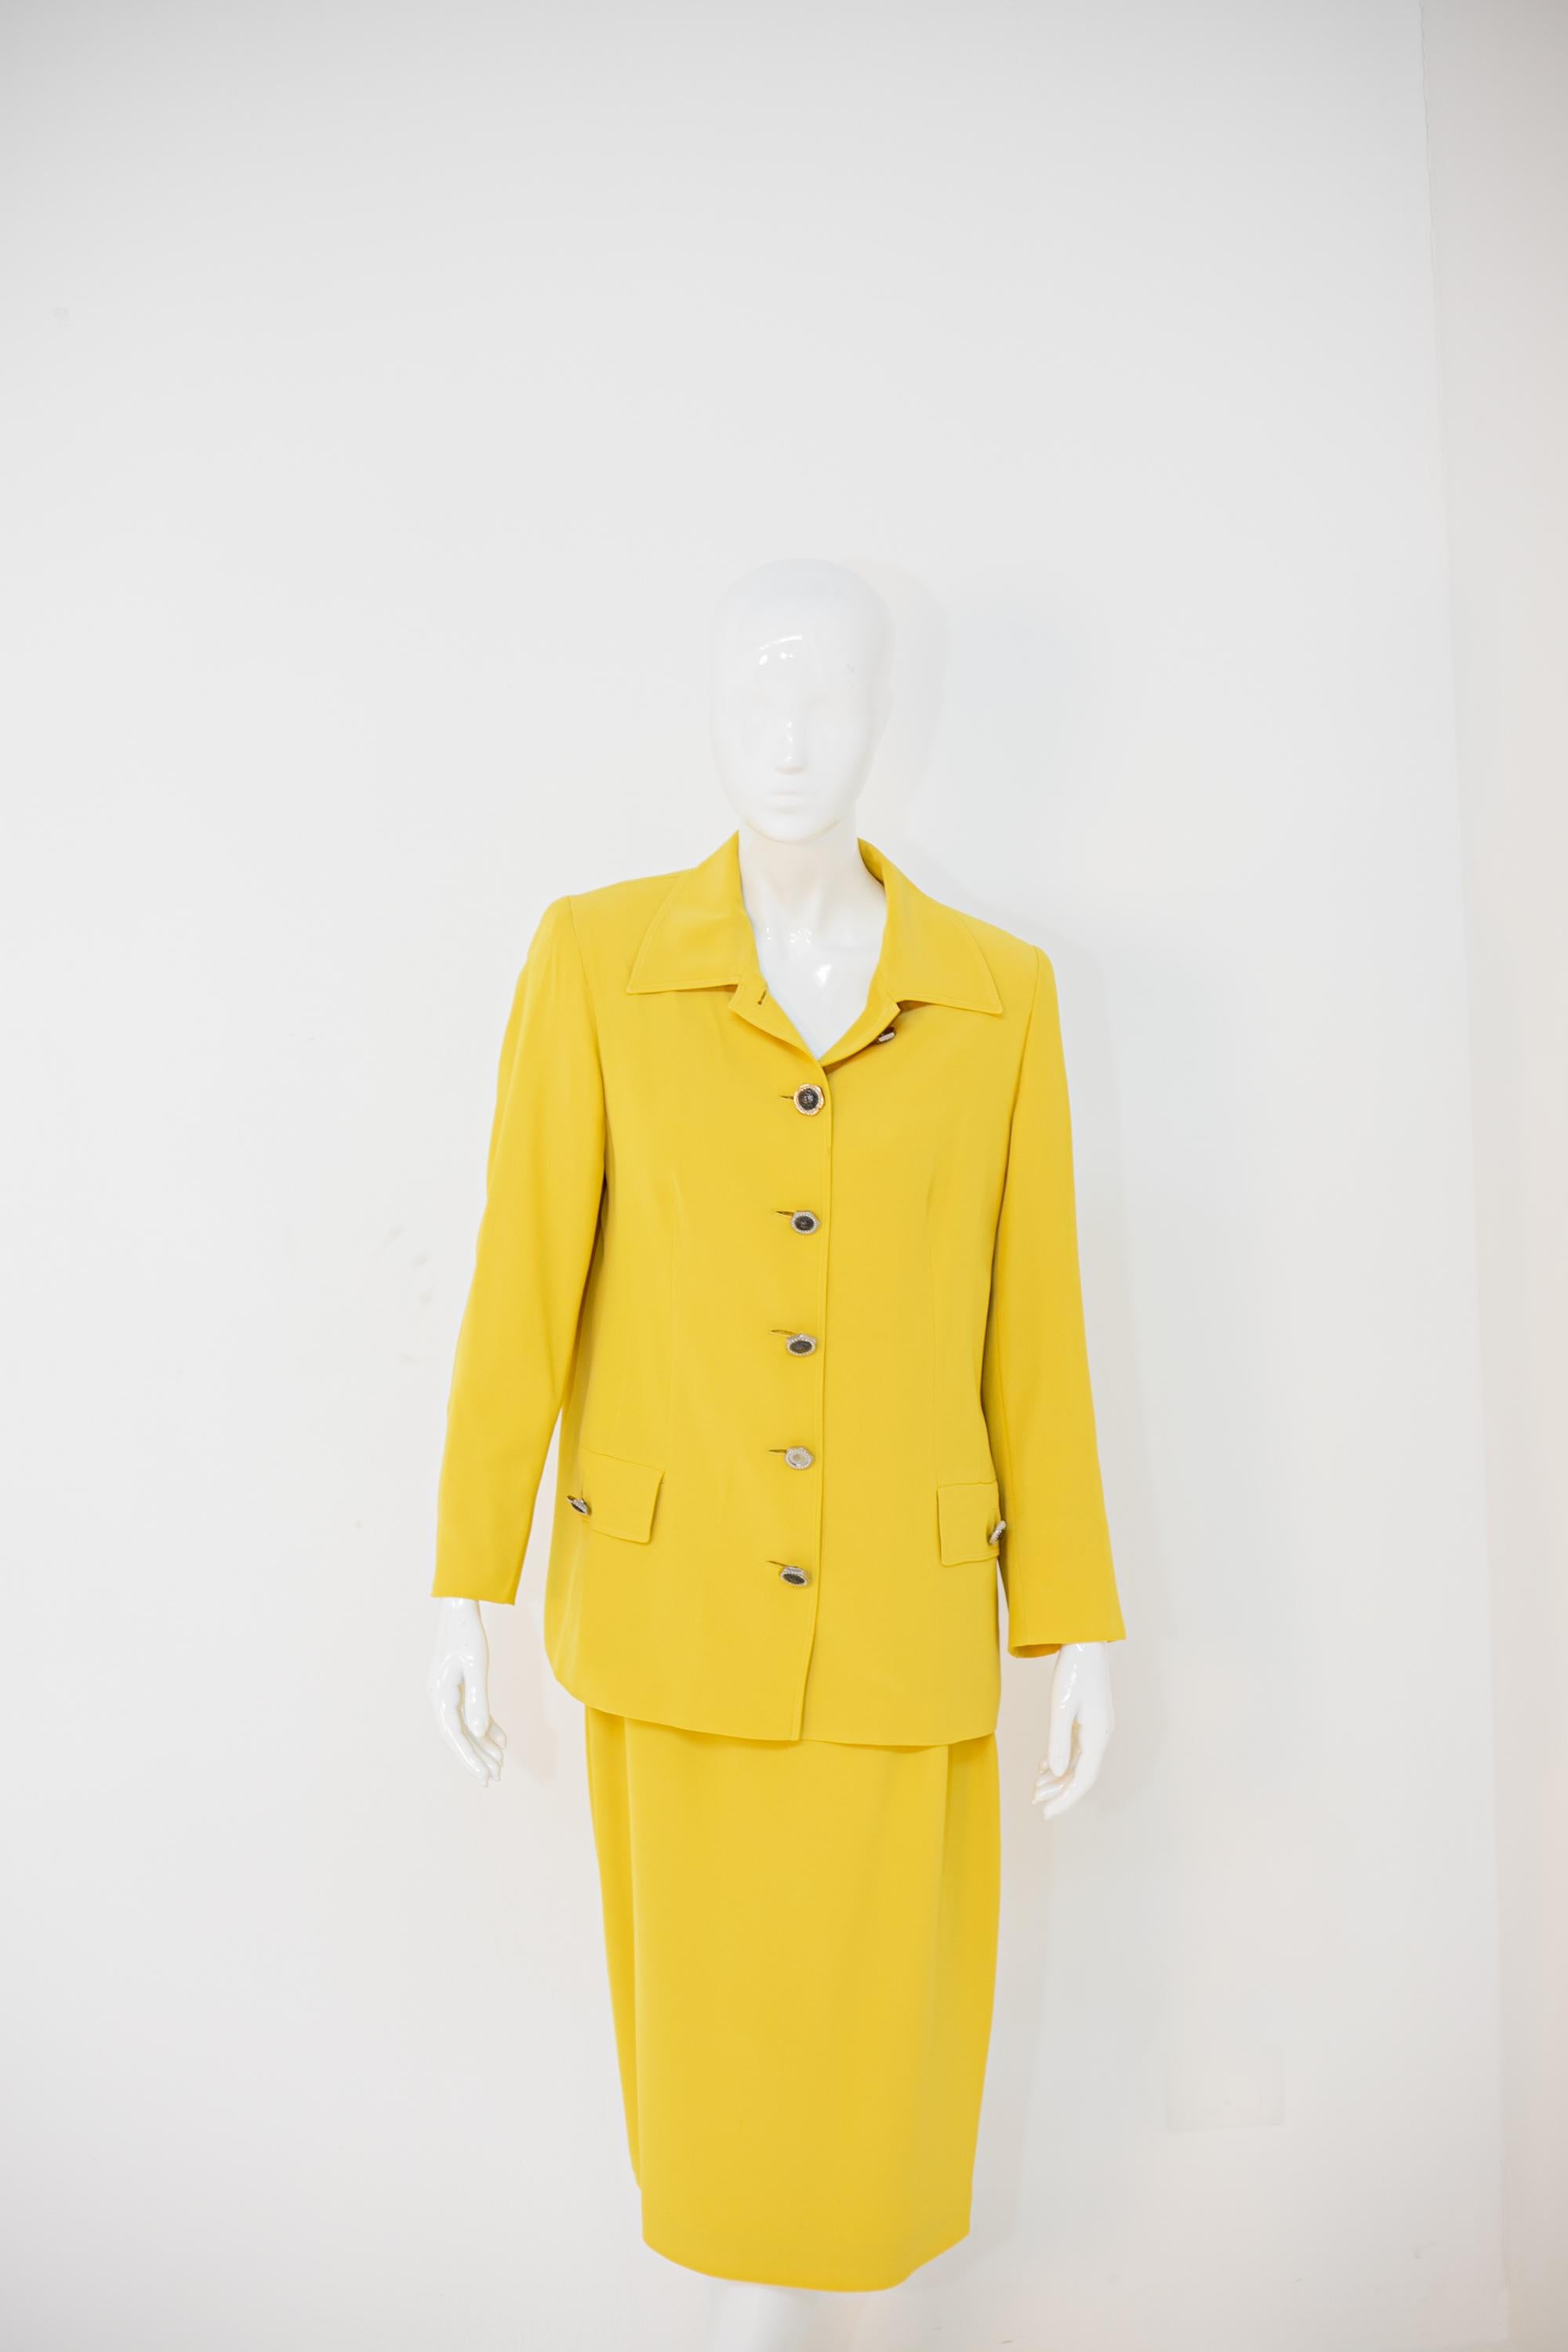 Women's Bright Gianni Versace Yellow Two Piece Formal Suit For Sale